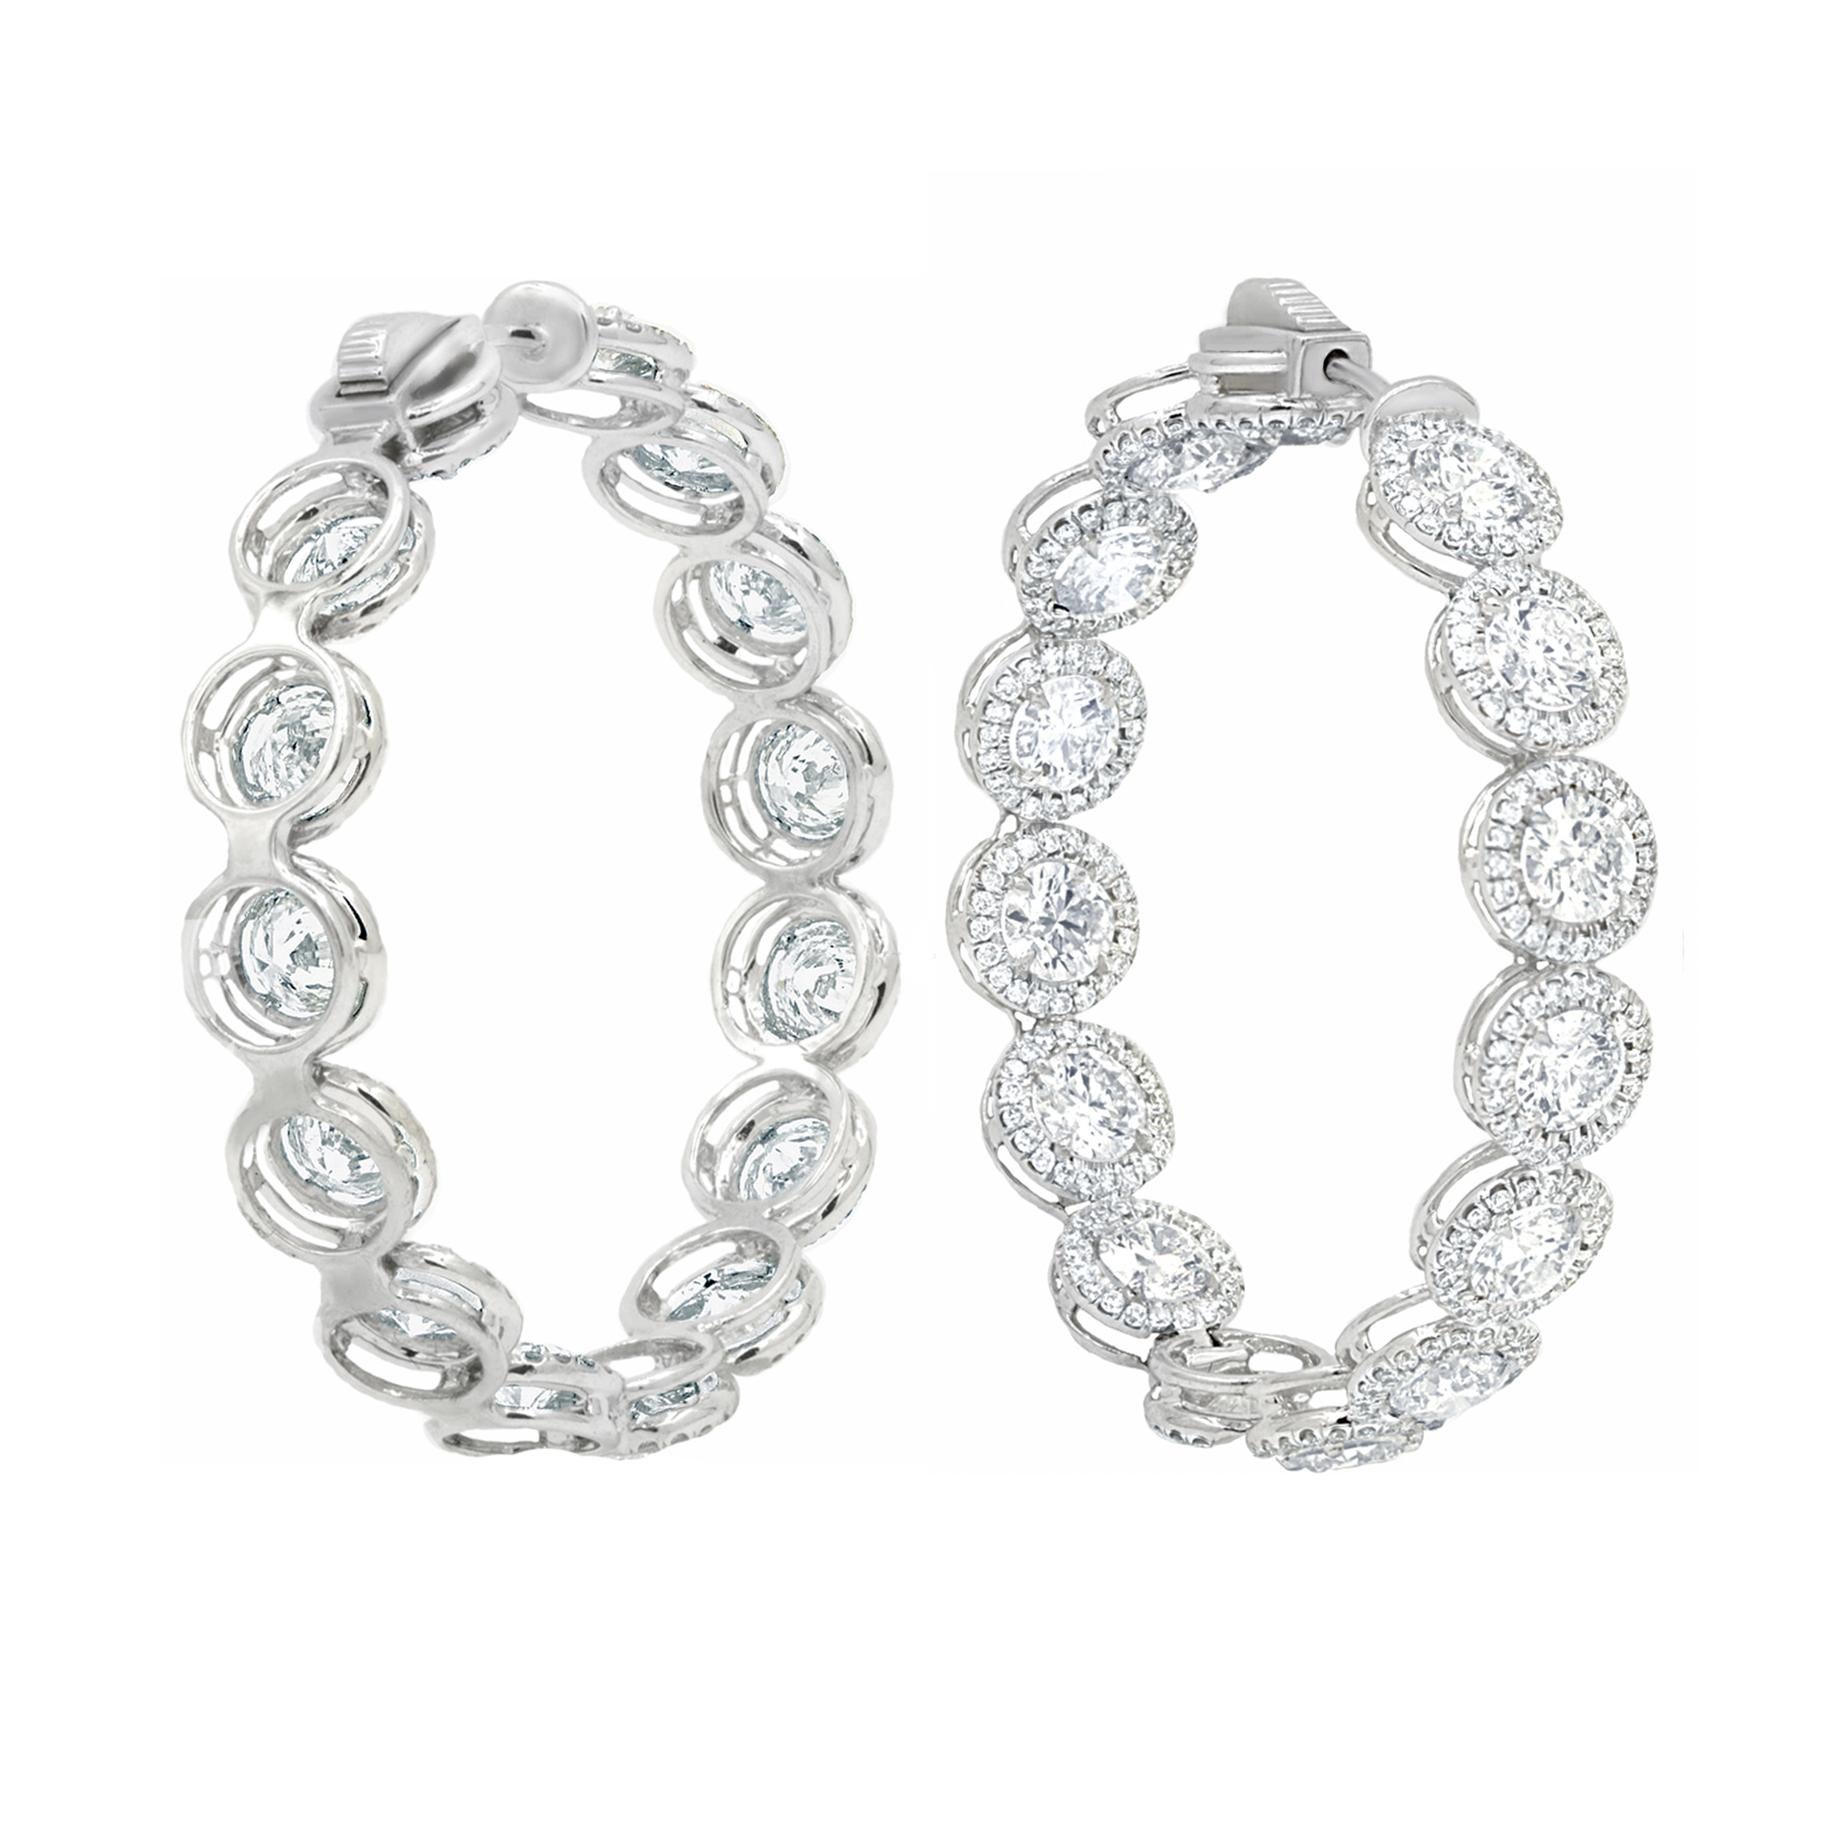 Modern Diana M. 18 kt white gold inside-out hoop earrings with a halo design For Sale